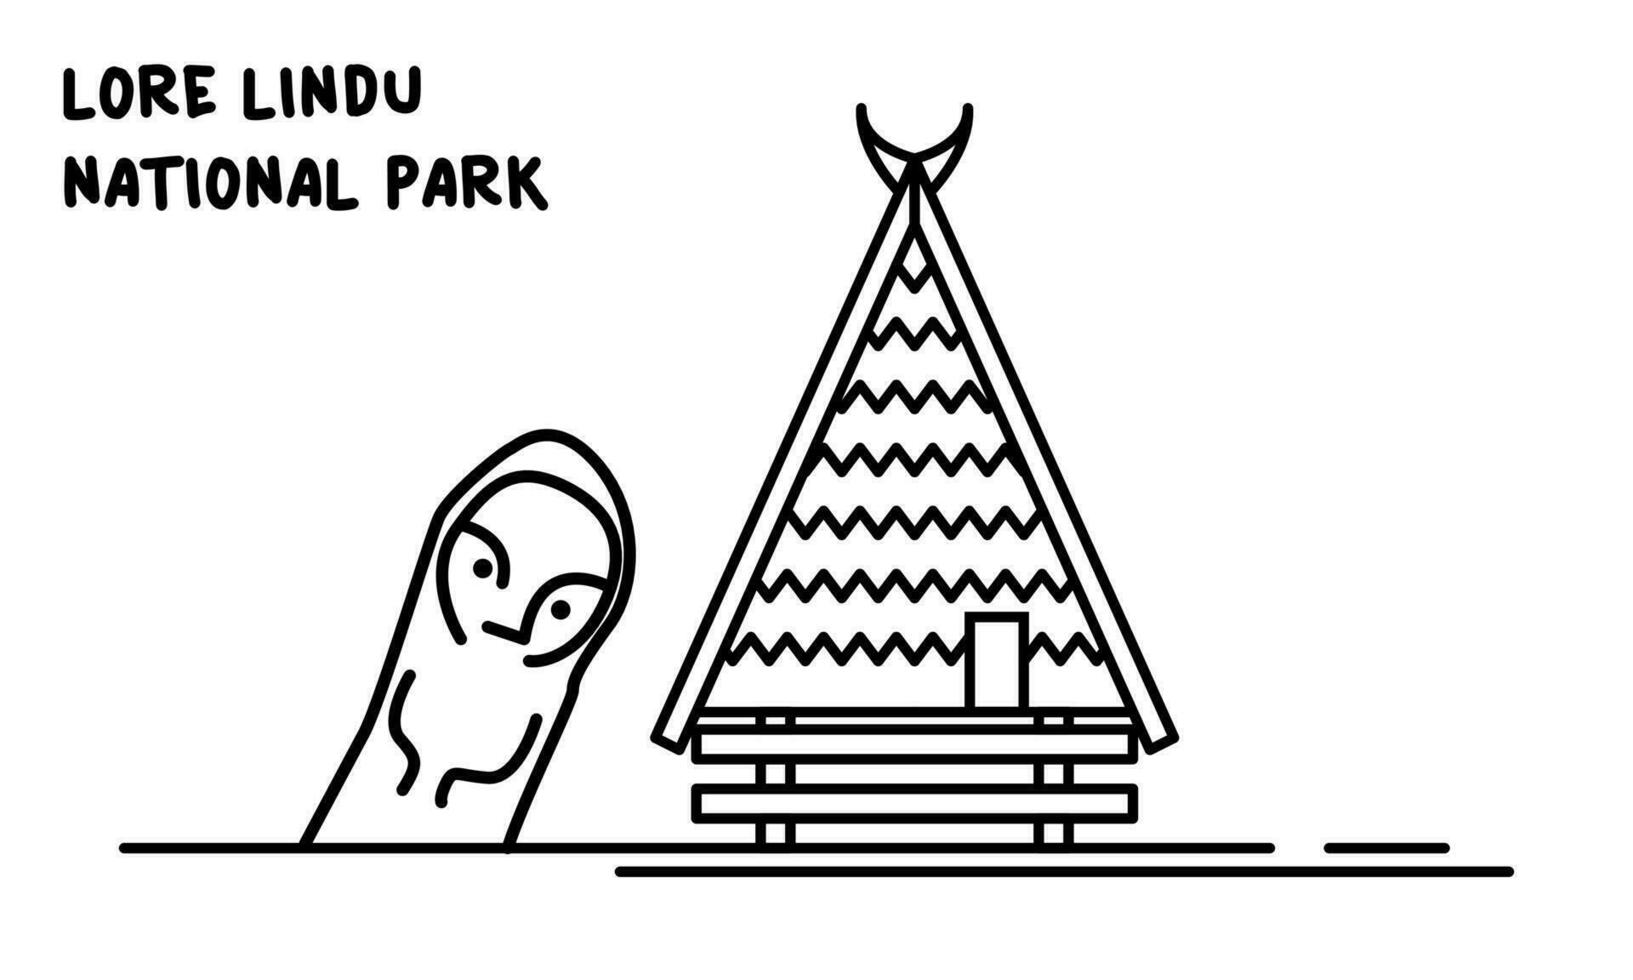 Line art vector megalithic statues and traditional houses in lore lindu national park, poso, central sulawesi. It is suitable for background designs, covers, ornament designs and others.